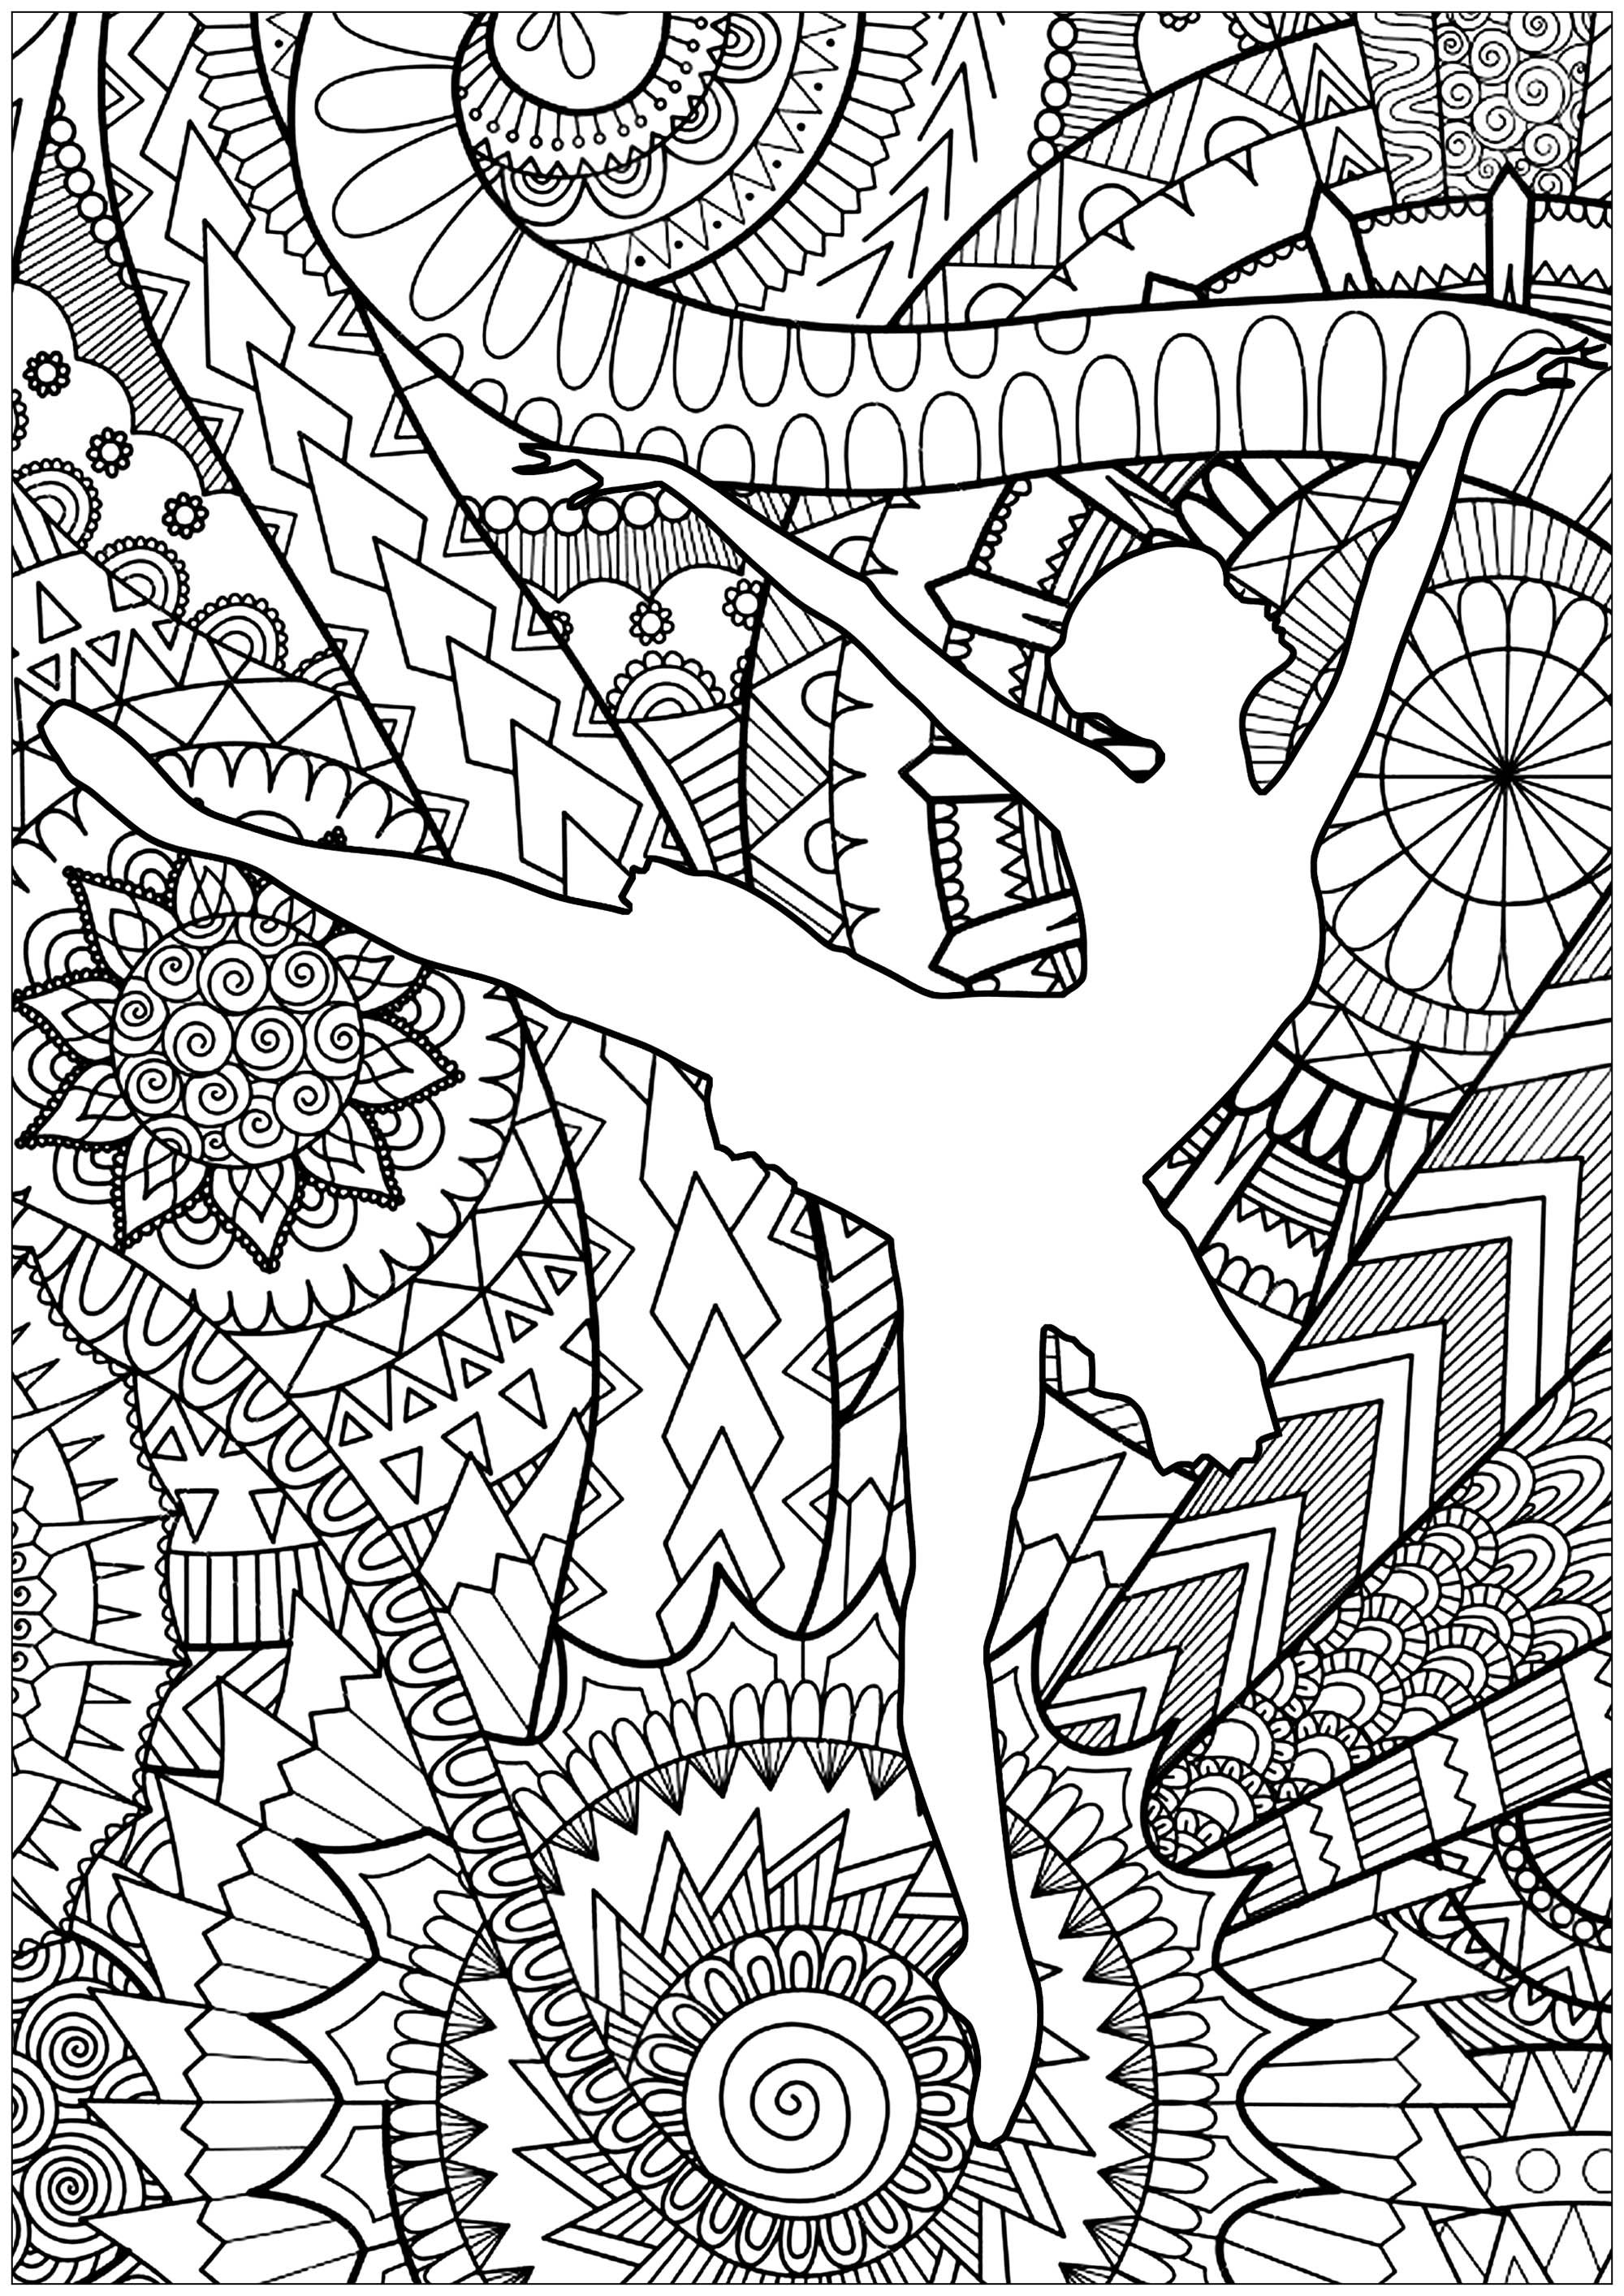 Download Ballet dancer - Anti stress Adult Coloring Pages